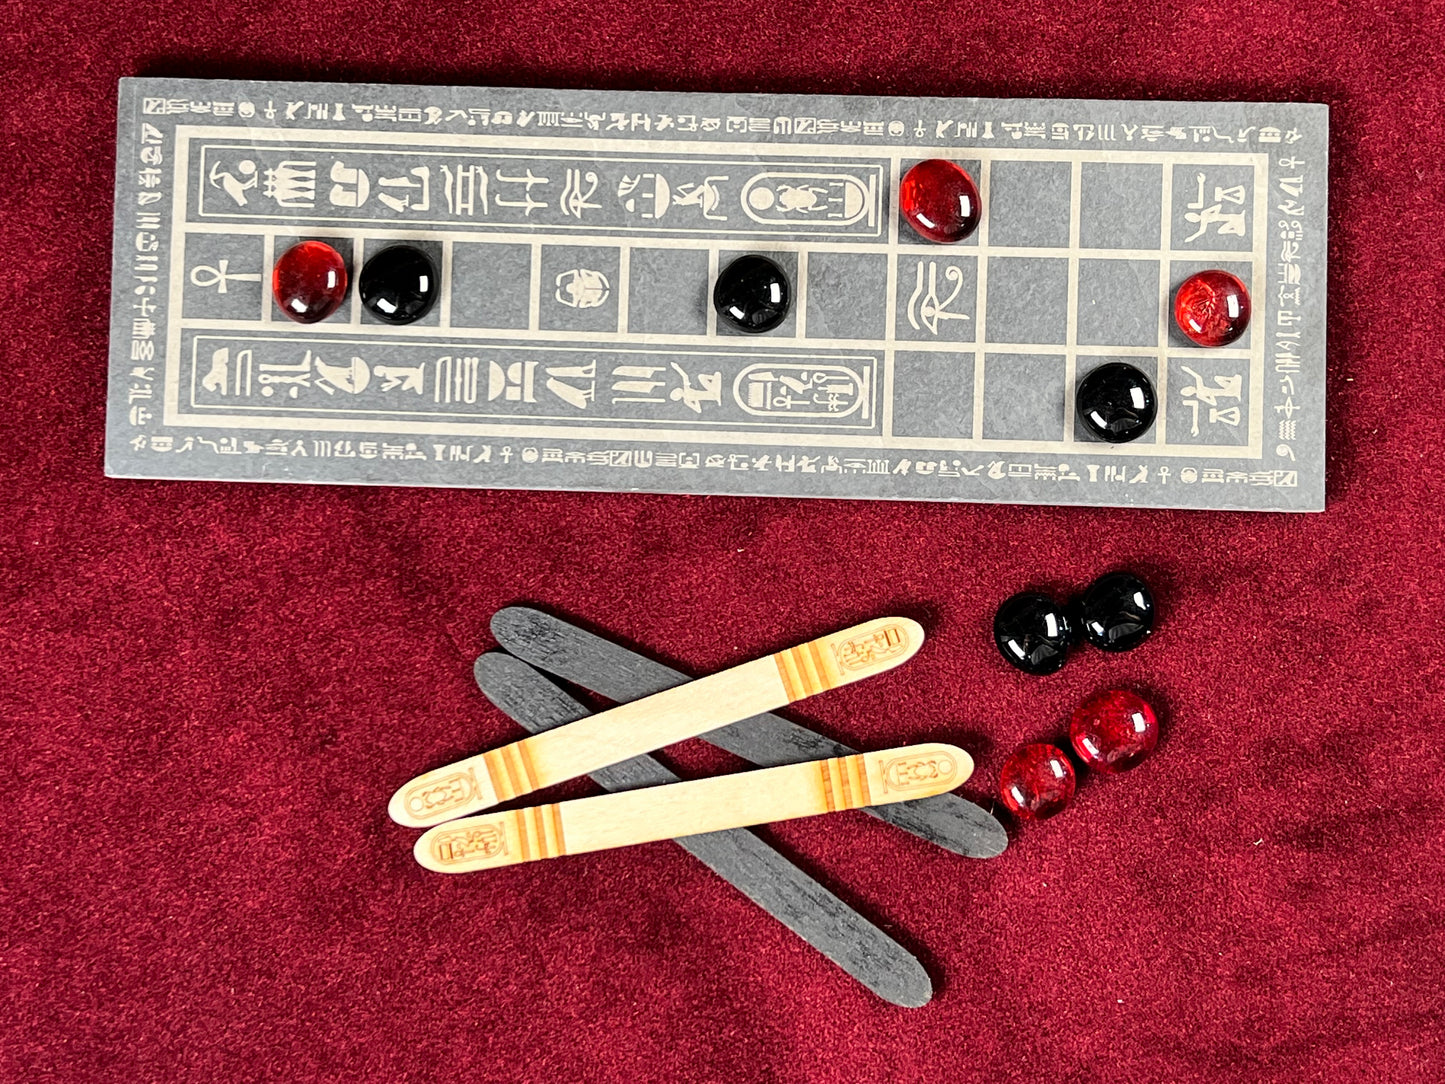 ASEB ~ The Ancient Egyptian Game of 20 Squares. Engraved in Natural Stone, Featuring Glass Pawns and Egyptian Casting Sticks.